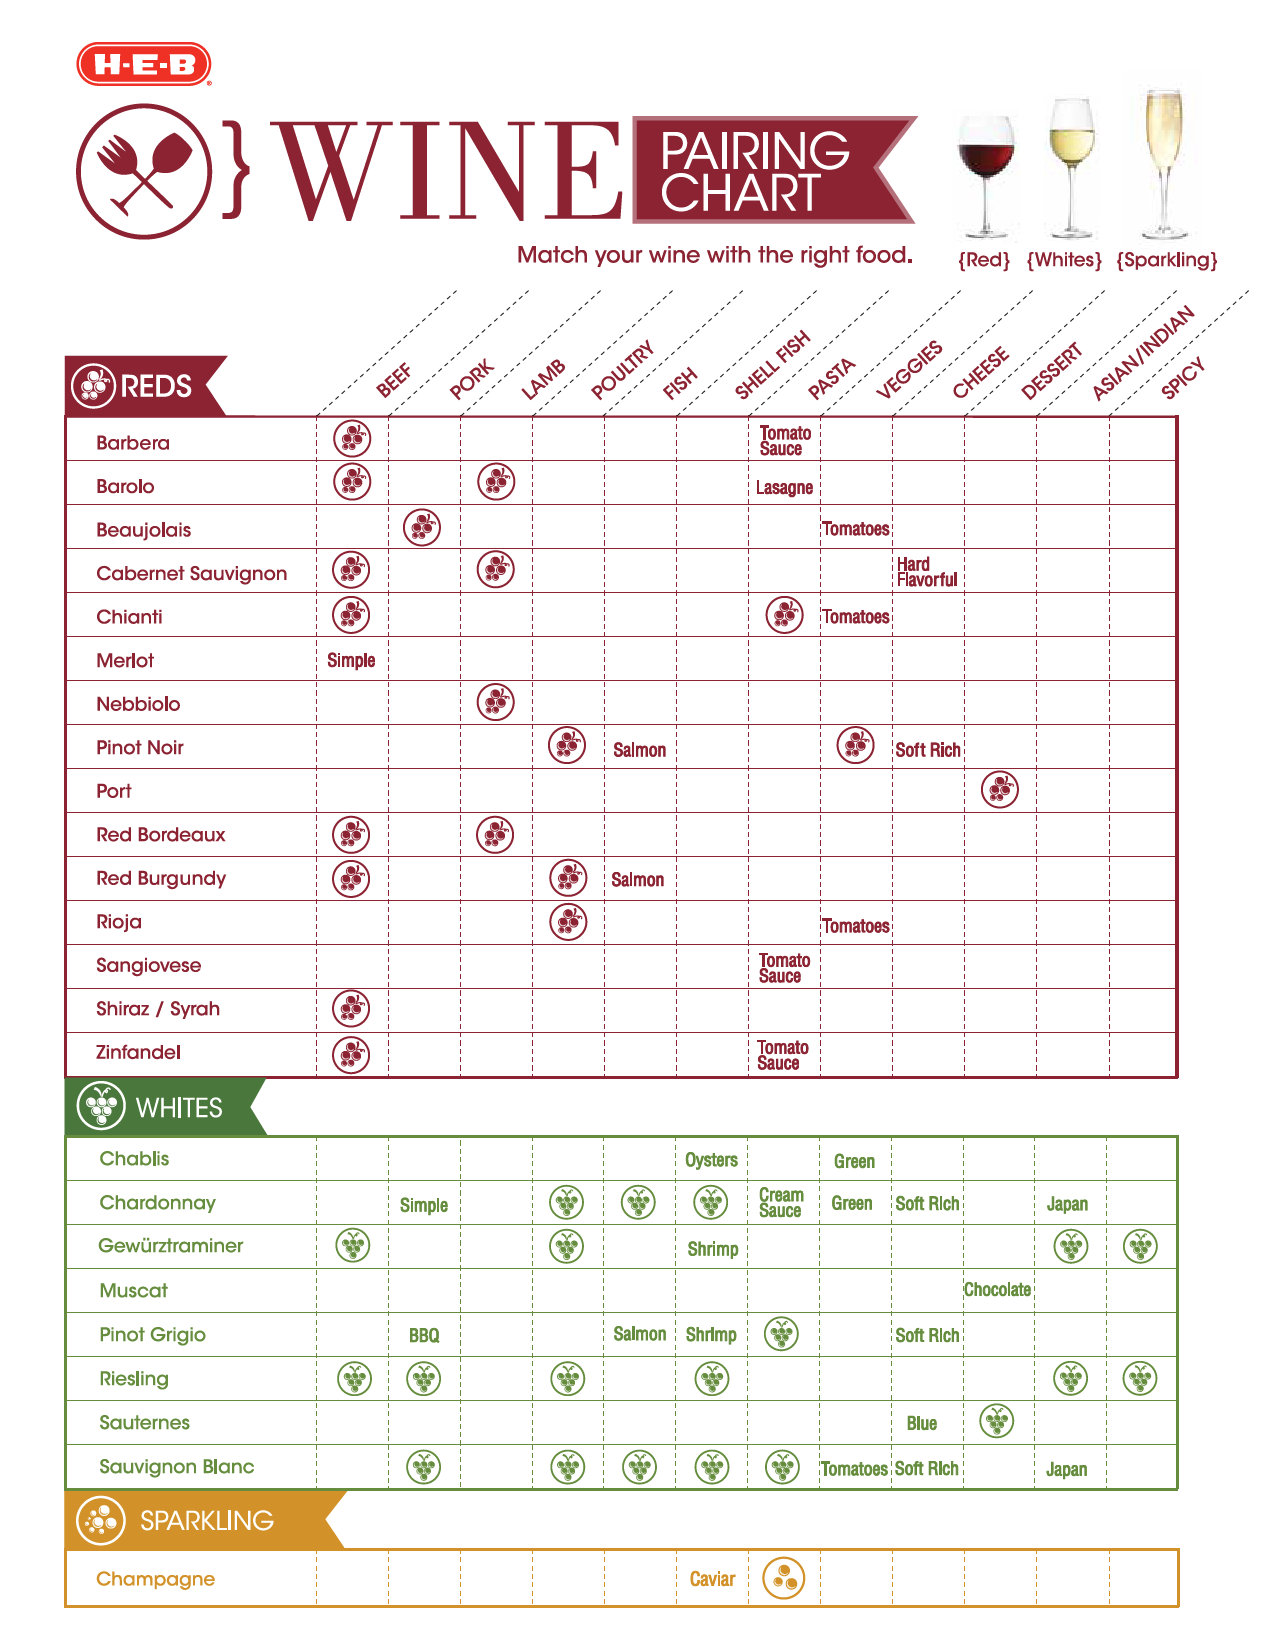 Wine and Food Pairings Chart | heb.com